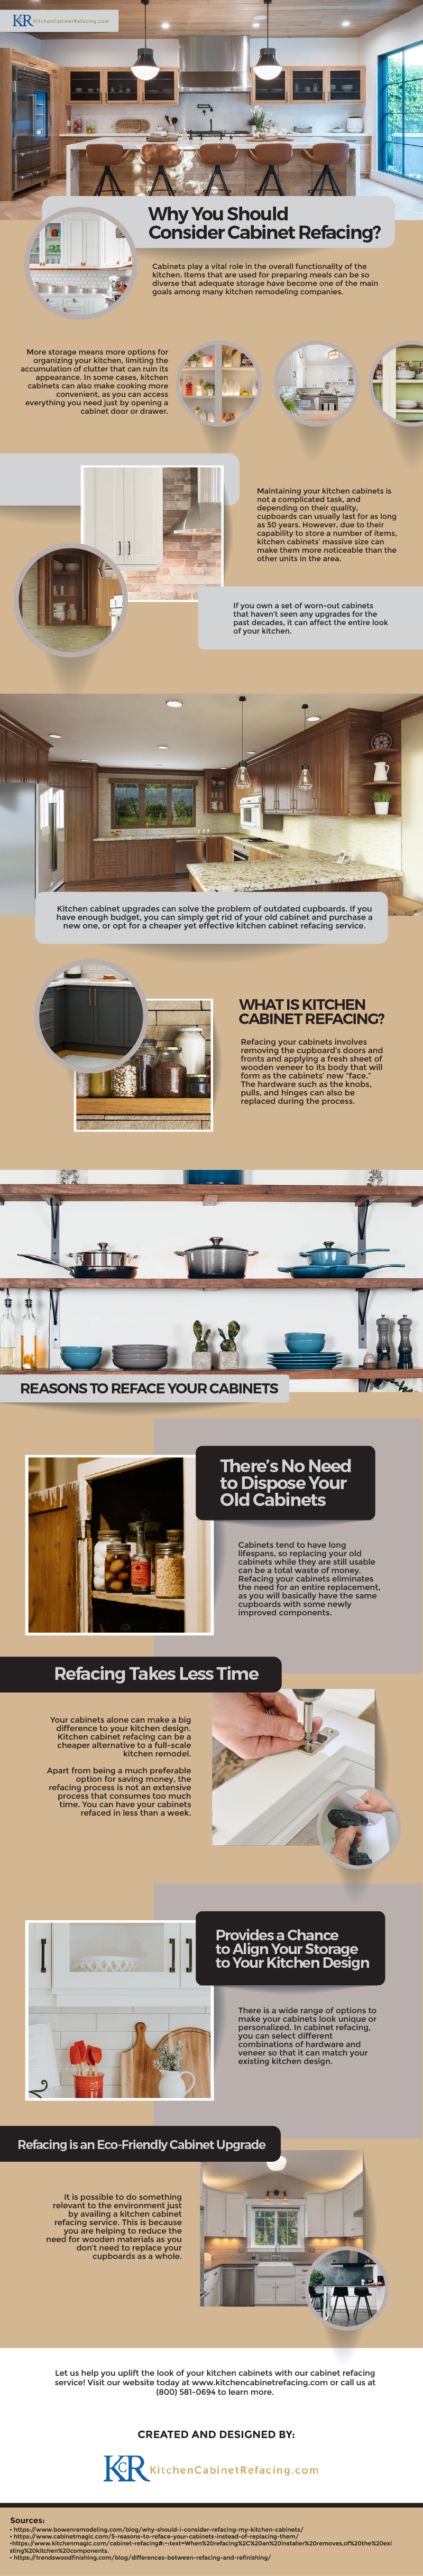 Why You Should Consider Cabinet Refacing